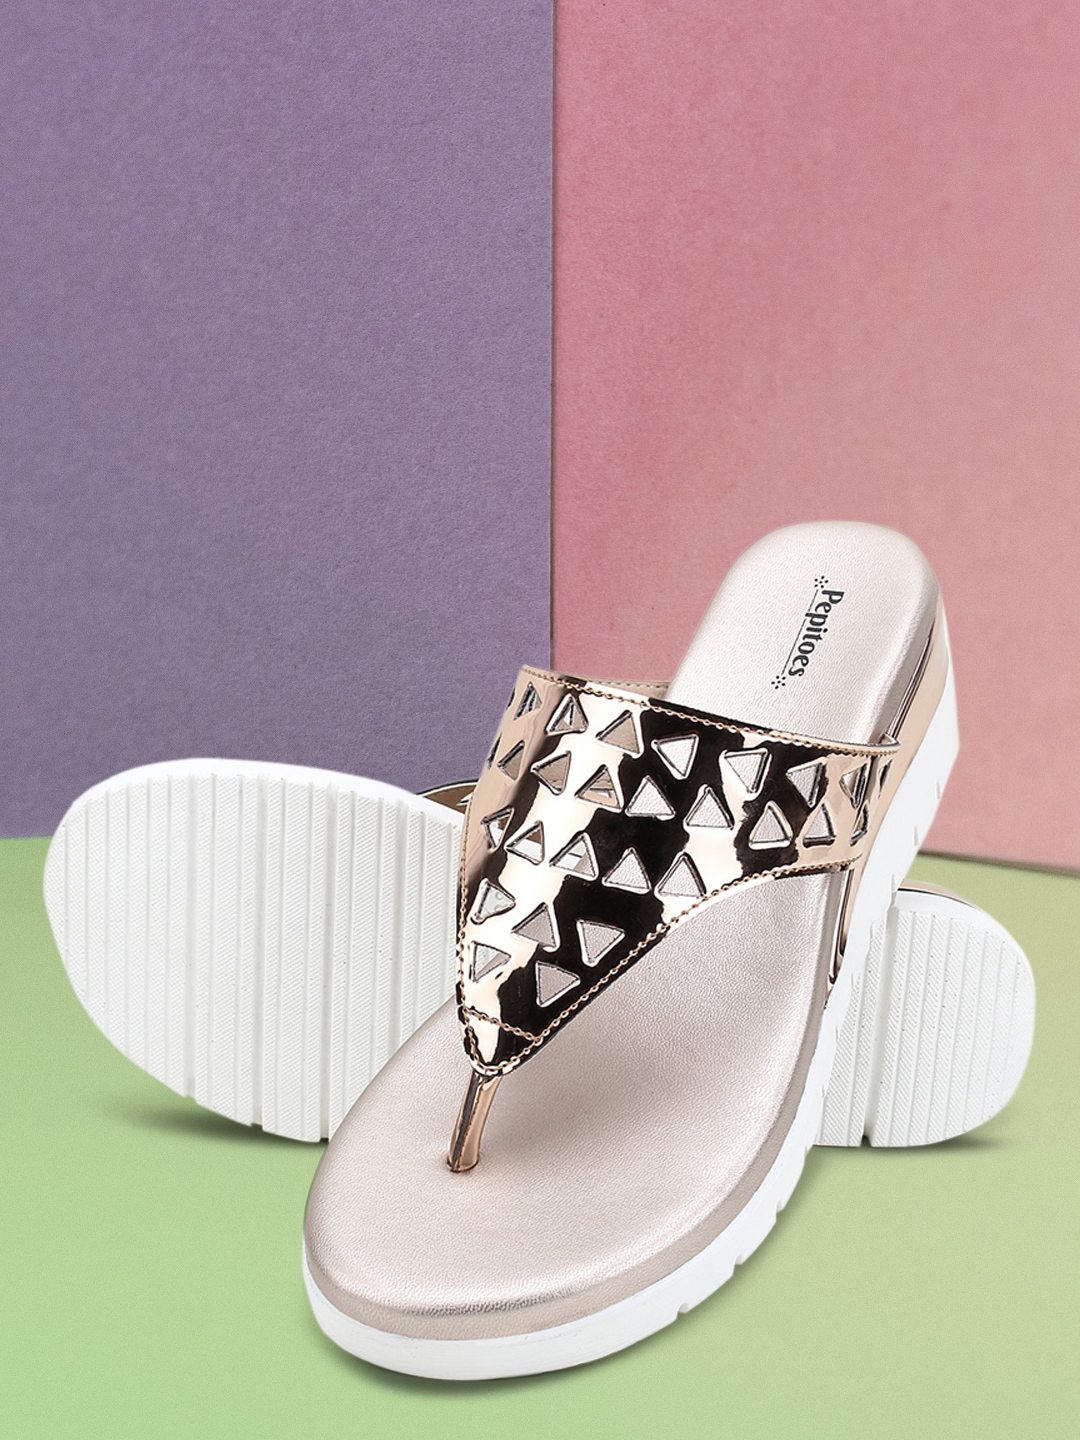 PEPITOES Women Rose Gold Flatform Sandals with Laser Cuts Price in India